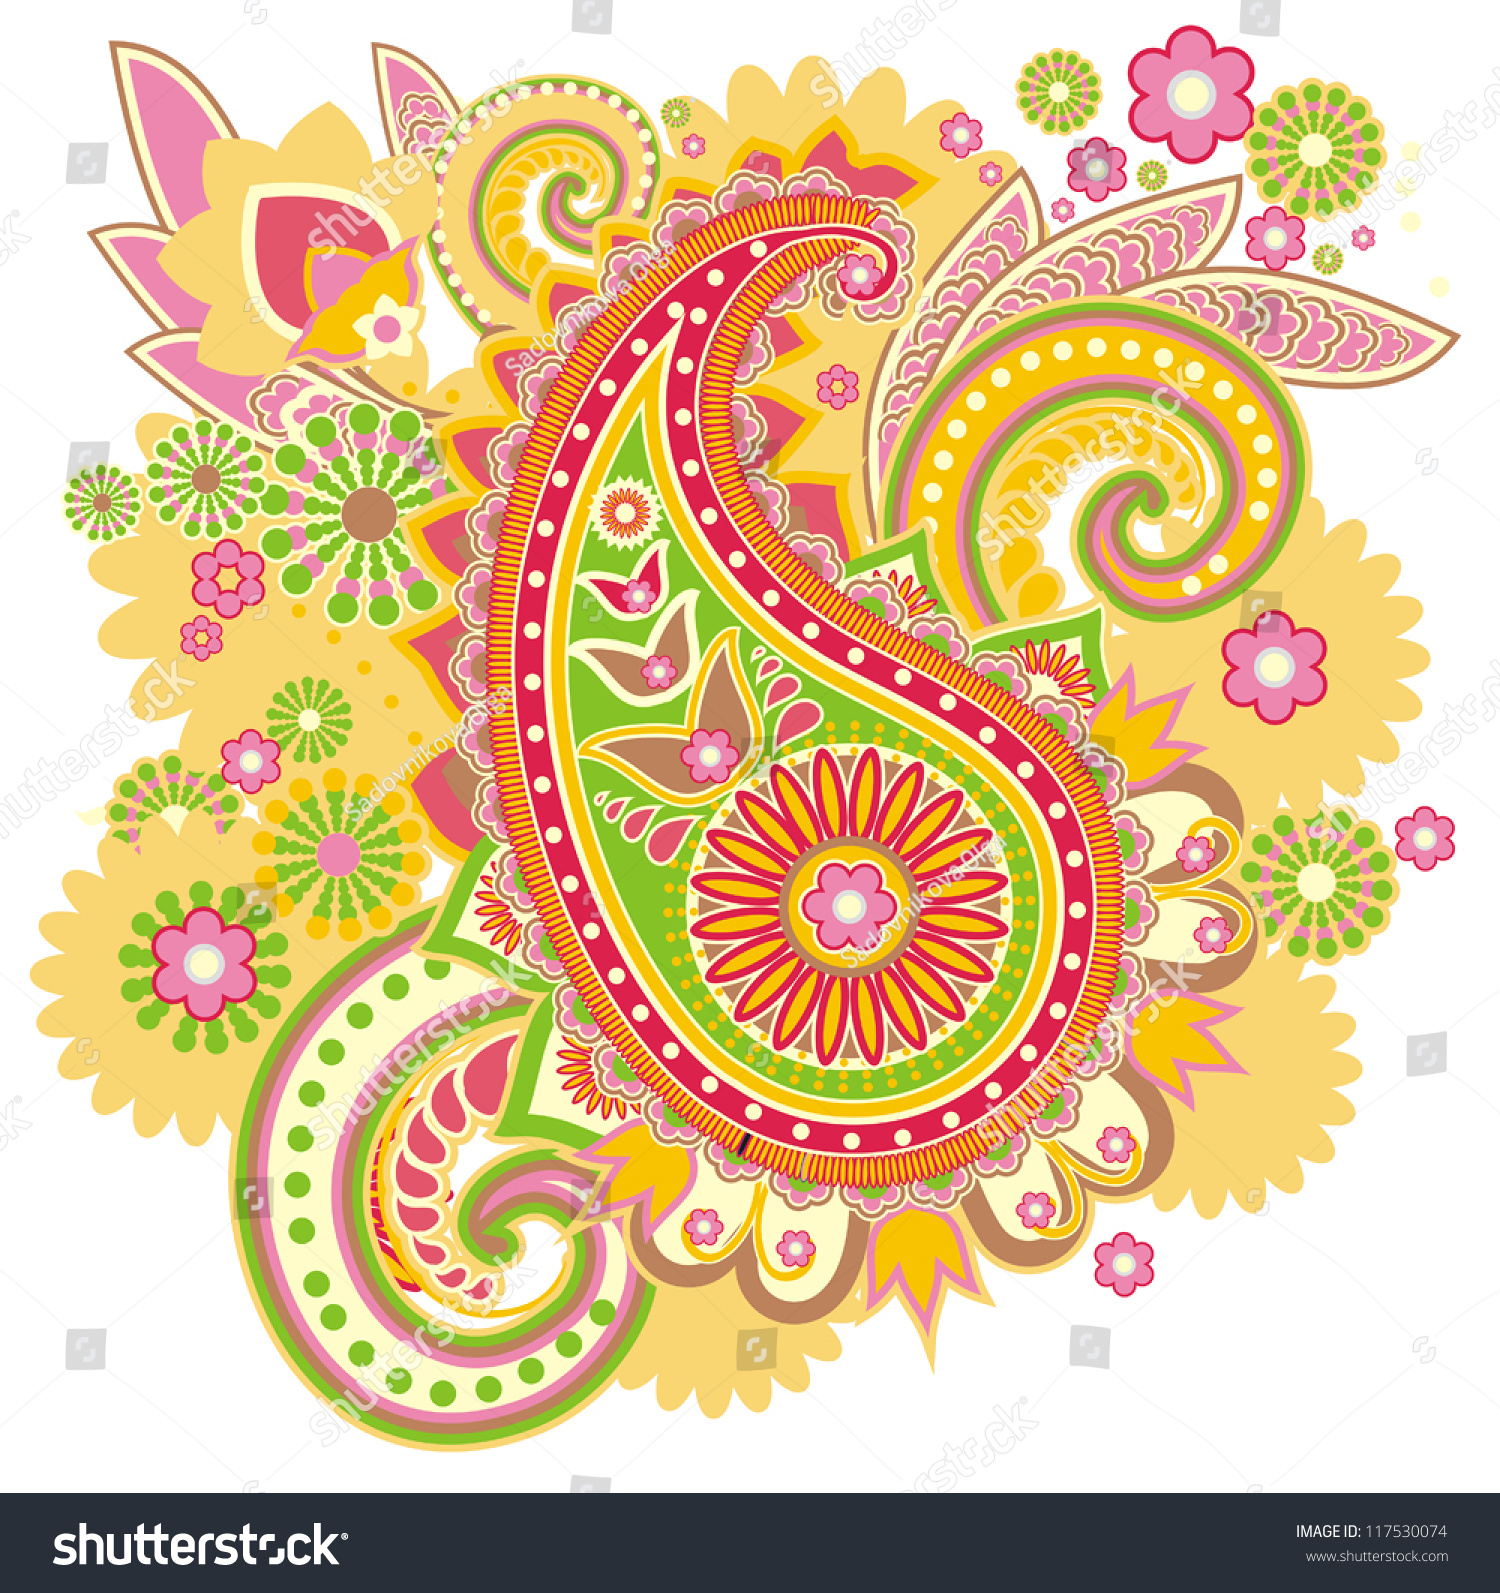 Pattern Based On Traditional Asian Elements Stock Vector 117530074 ...